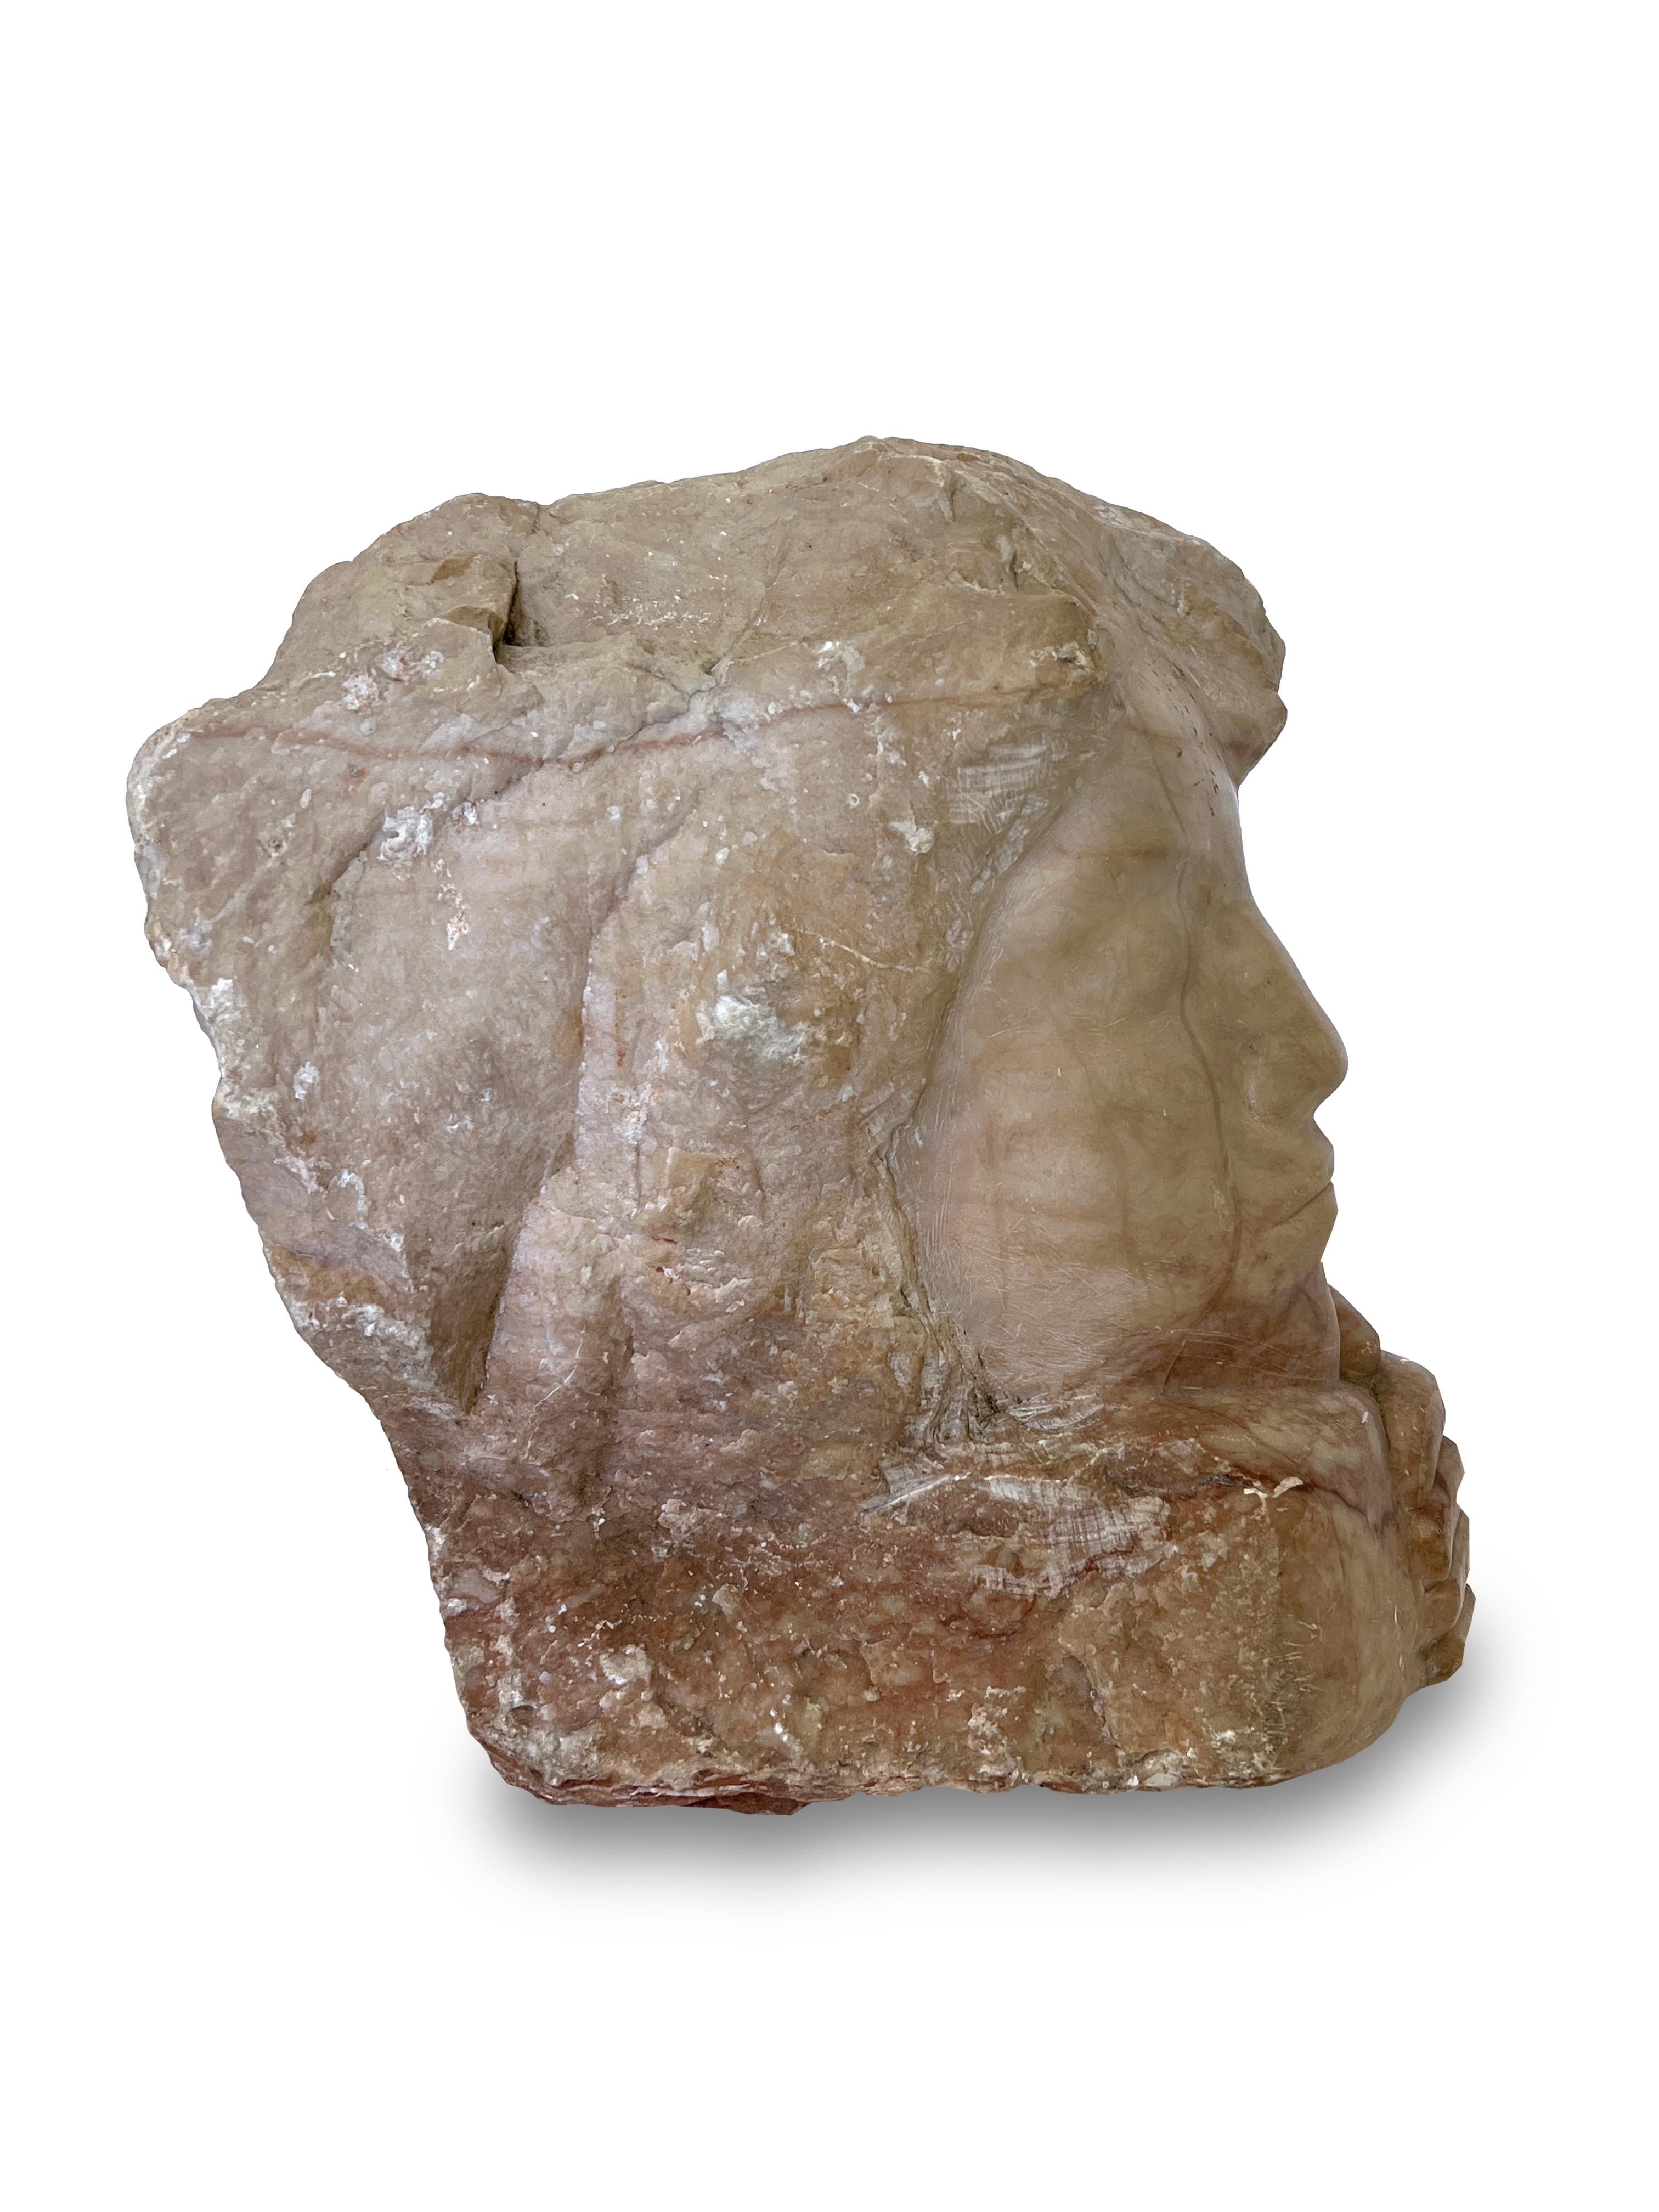 Beautiful hand carved face sculpture of a woman. This piece was carved on a rought cut piece of marble leaving the natural beauty of the material. A great accent piece for any room. 

Property from esteemed interior designer Juan Montoya. Juan